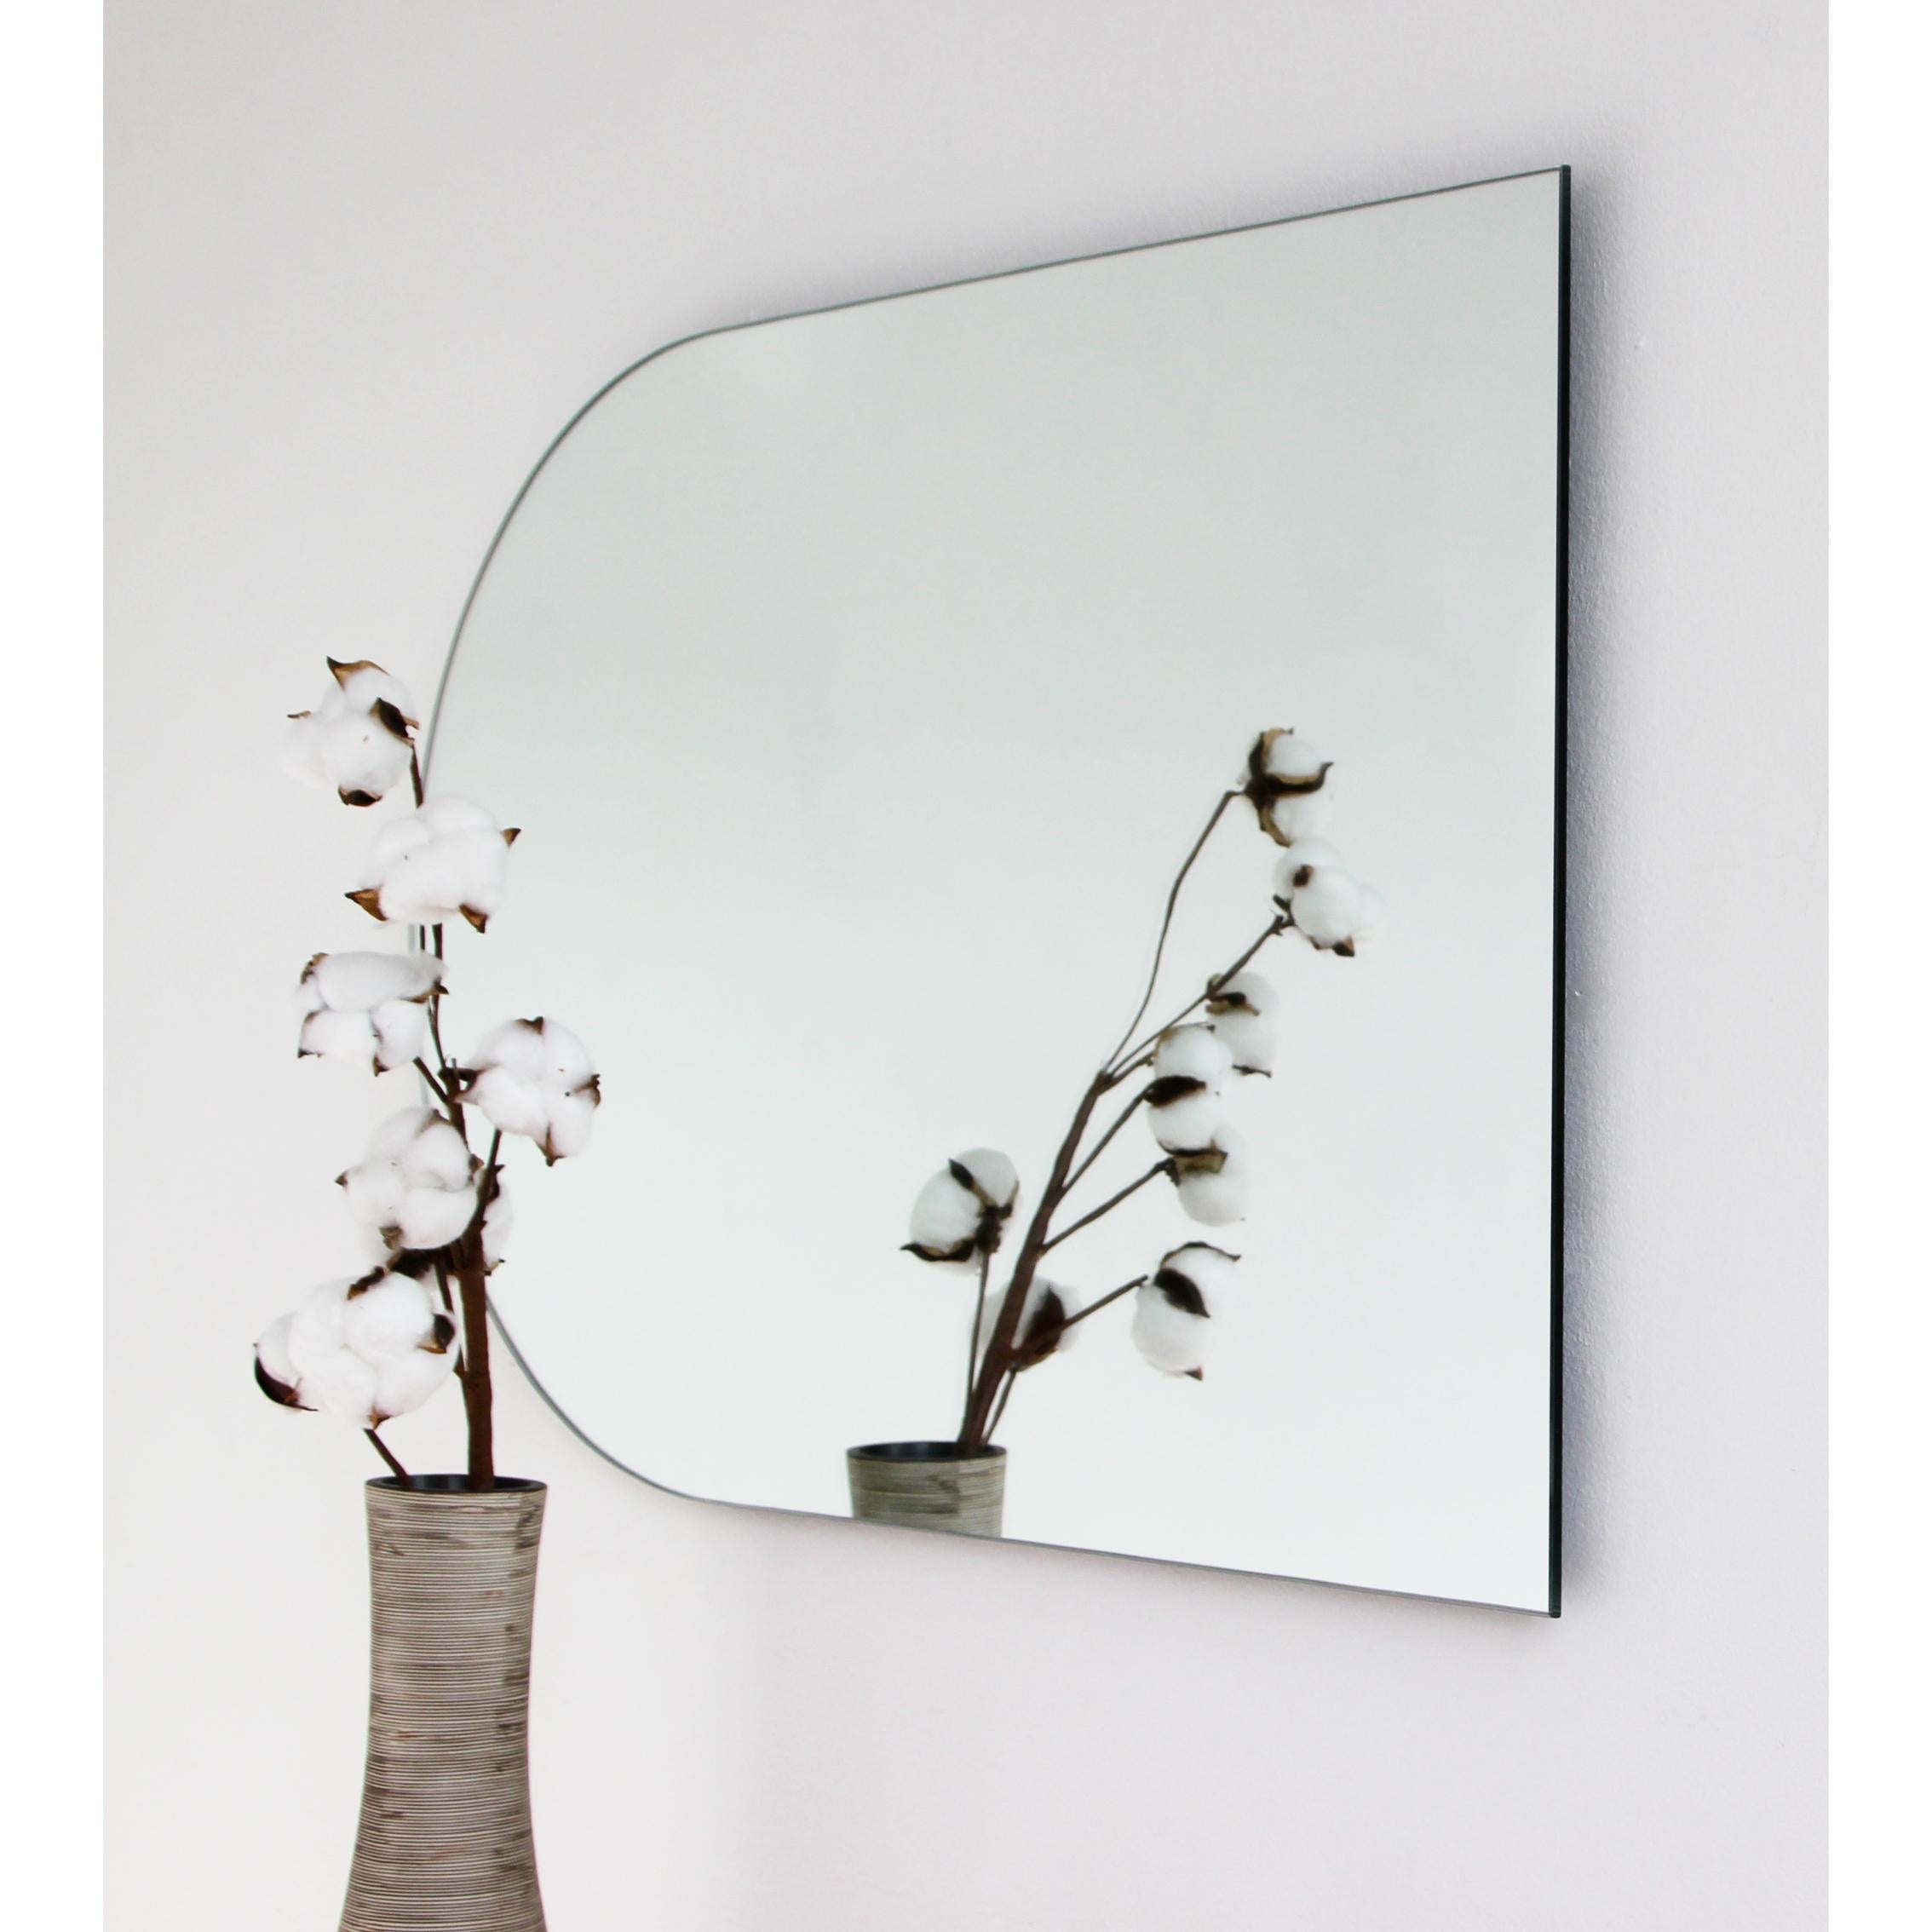 Contemporary Arcus Arched Minimalist Frameless Mirror with Floating Effect, Large For Sale